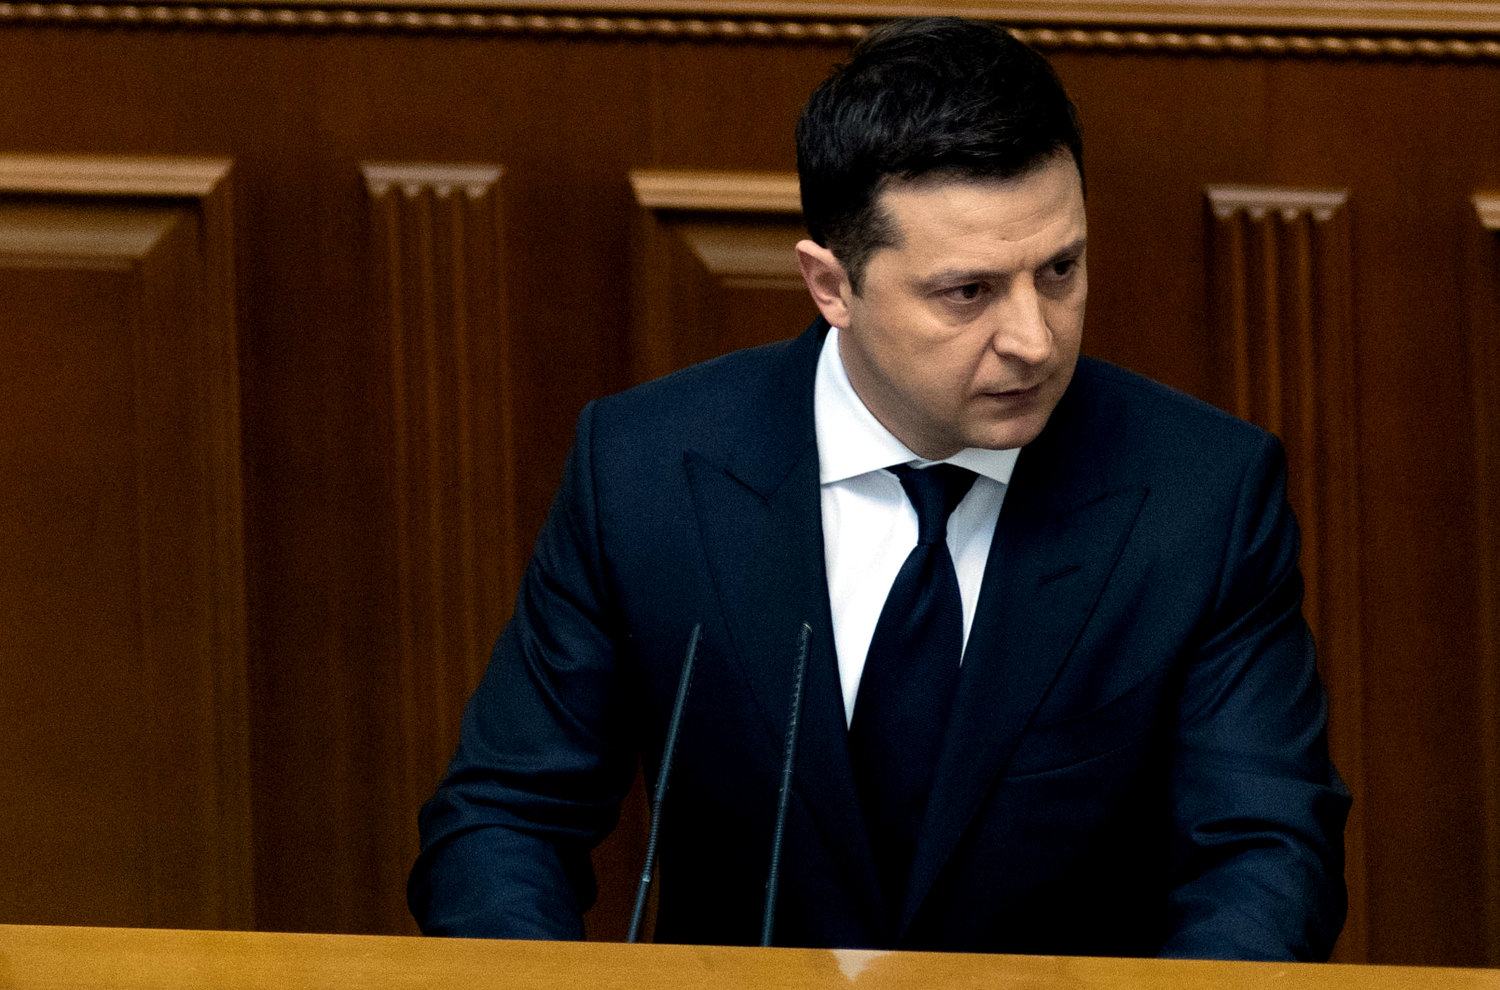 More than 500,000 Ukrainians forcibly deported to russia - Zelensky 2